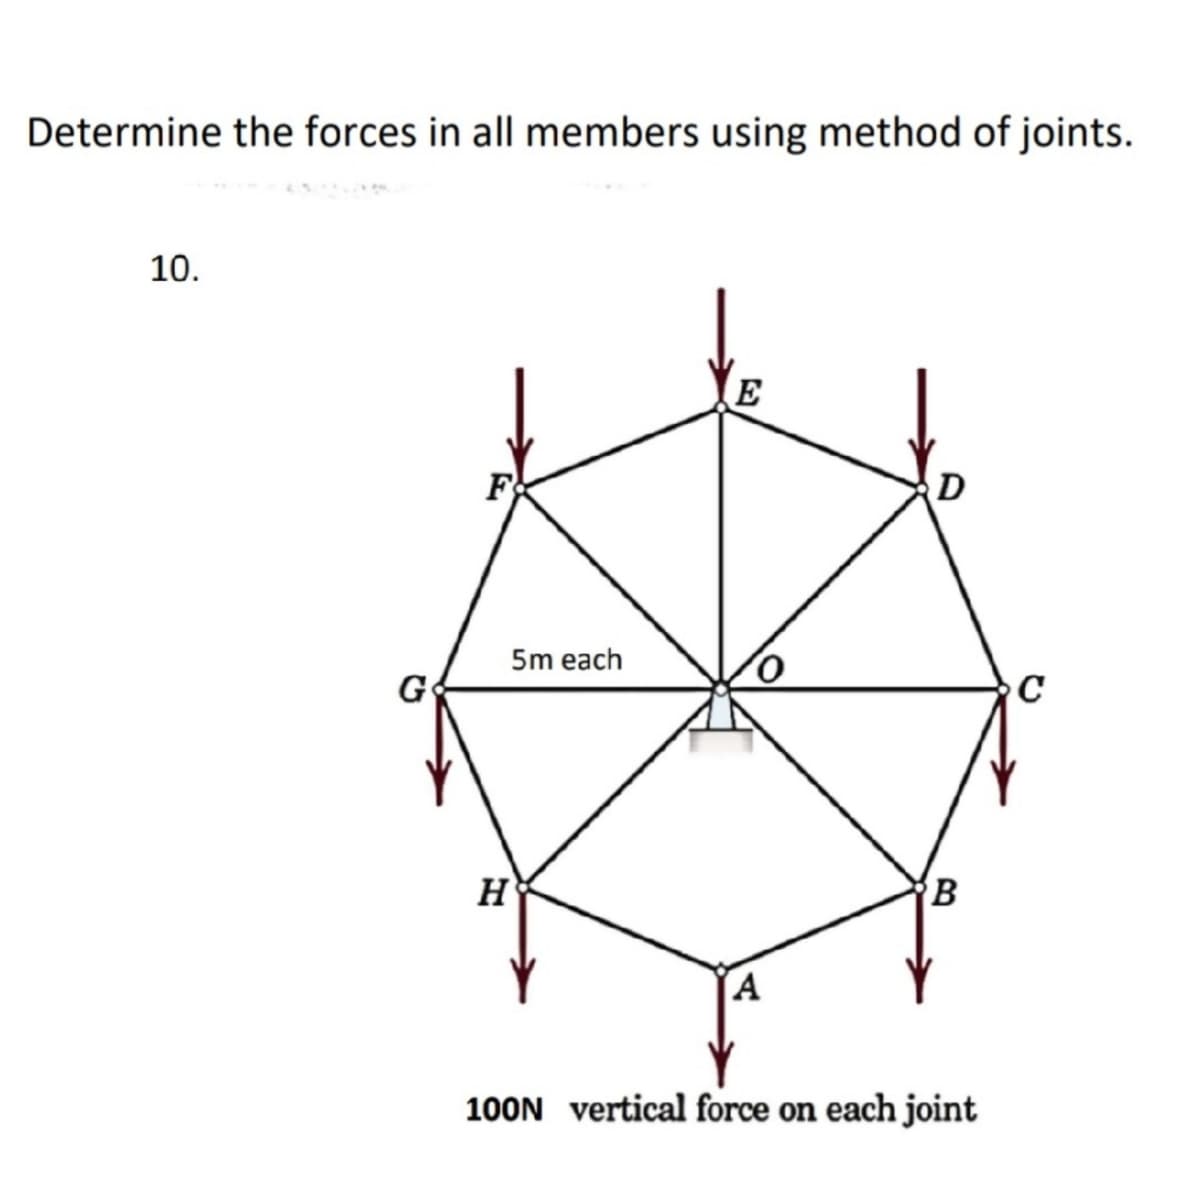 Determine the forces in all members using method of joints.
10.
E
F
D
5m each
H
B
A
100N vertical force on each joint
